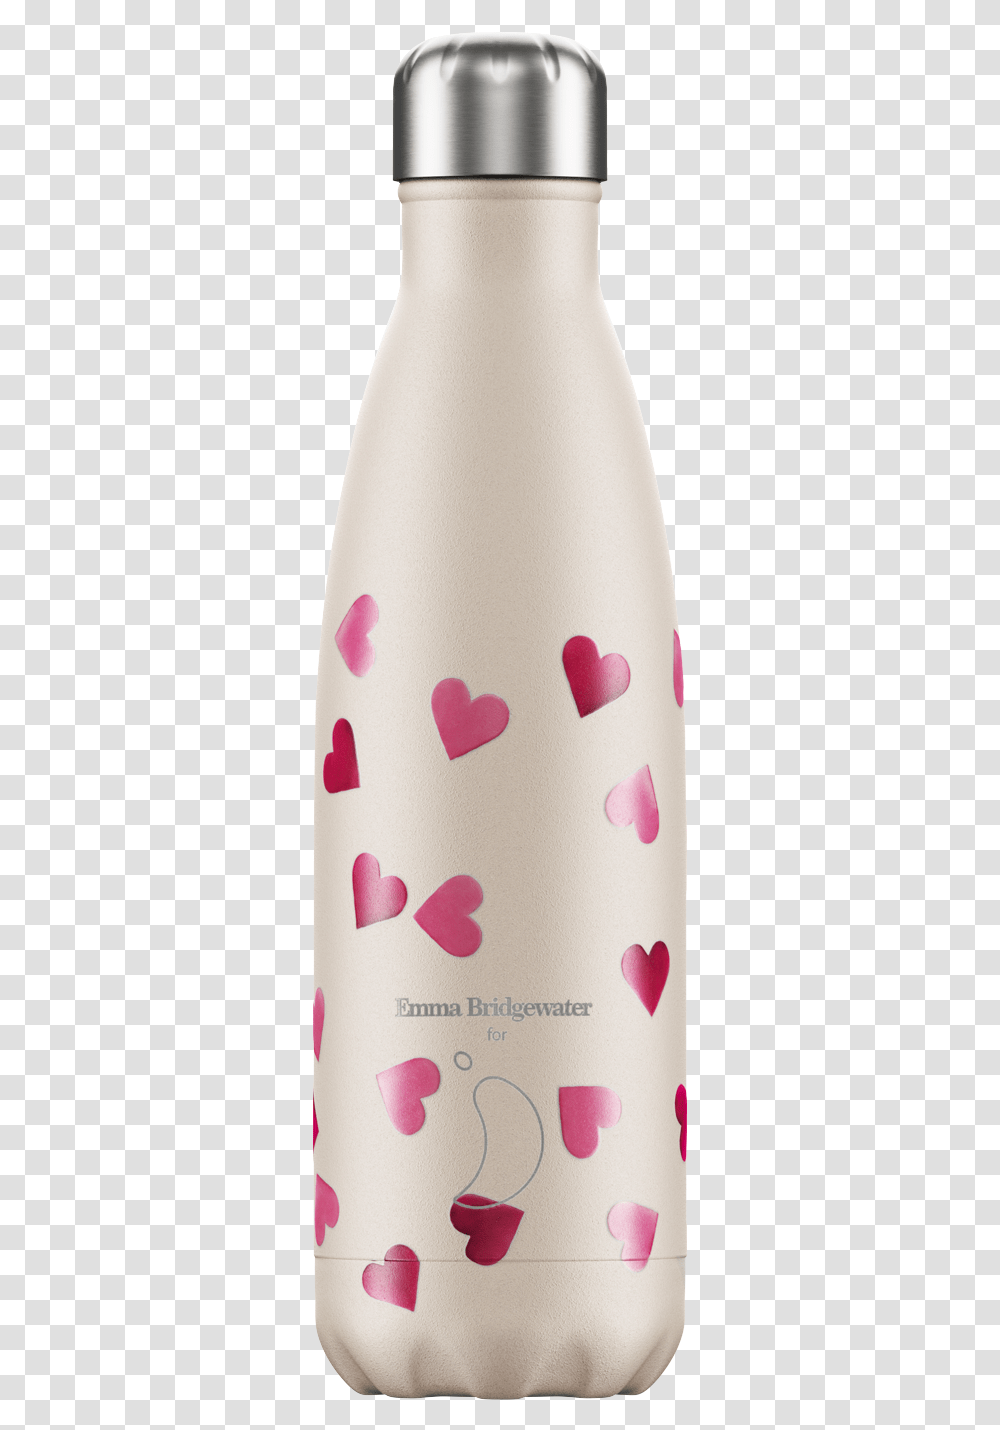 Emma Bridgewater Chilly's Water Bottle, Shaker, Texture, Cosmetics, Beverage Transparent Png